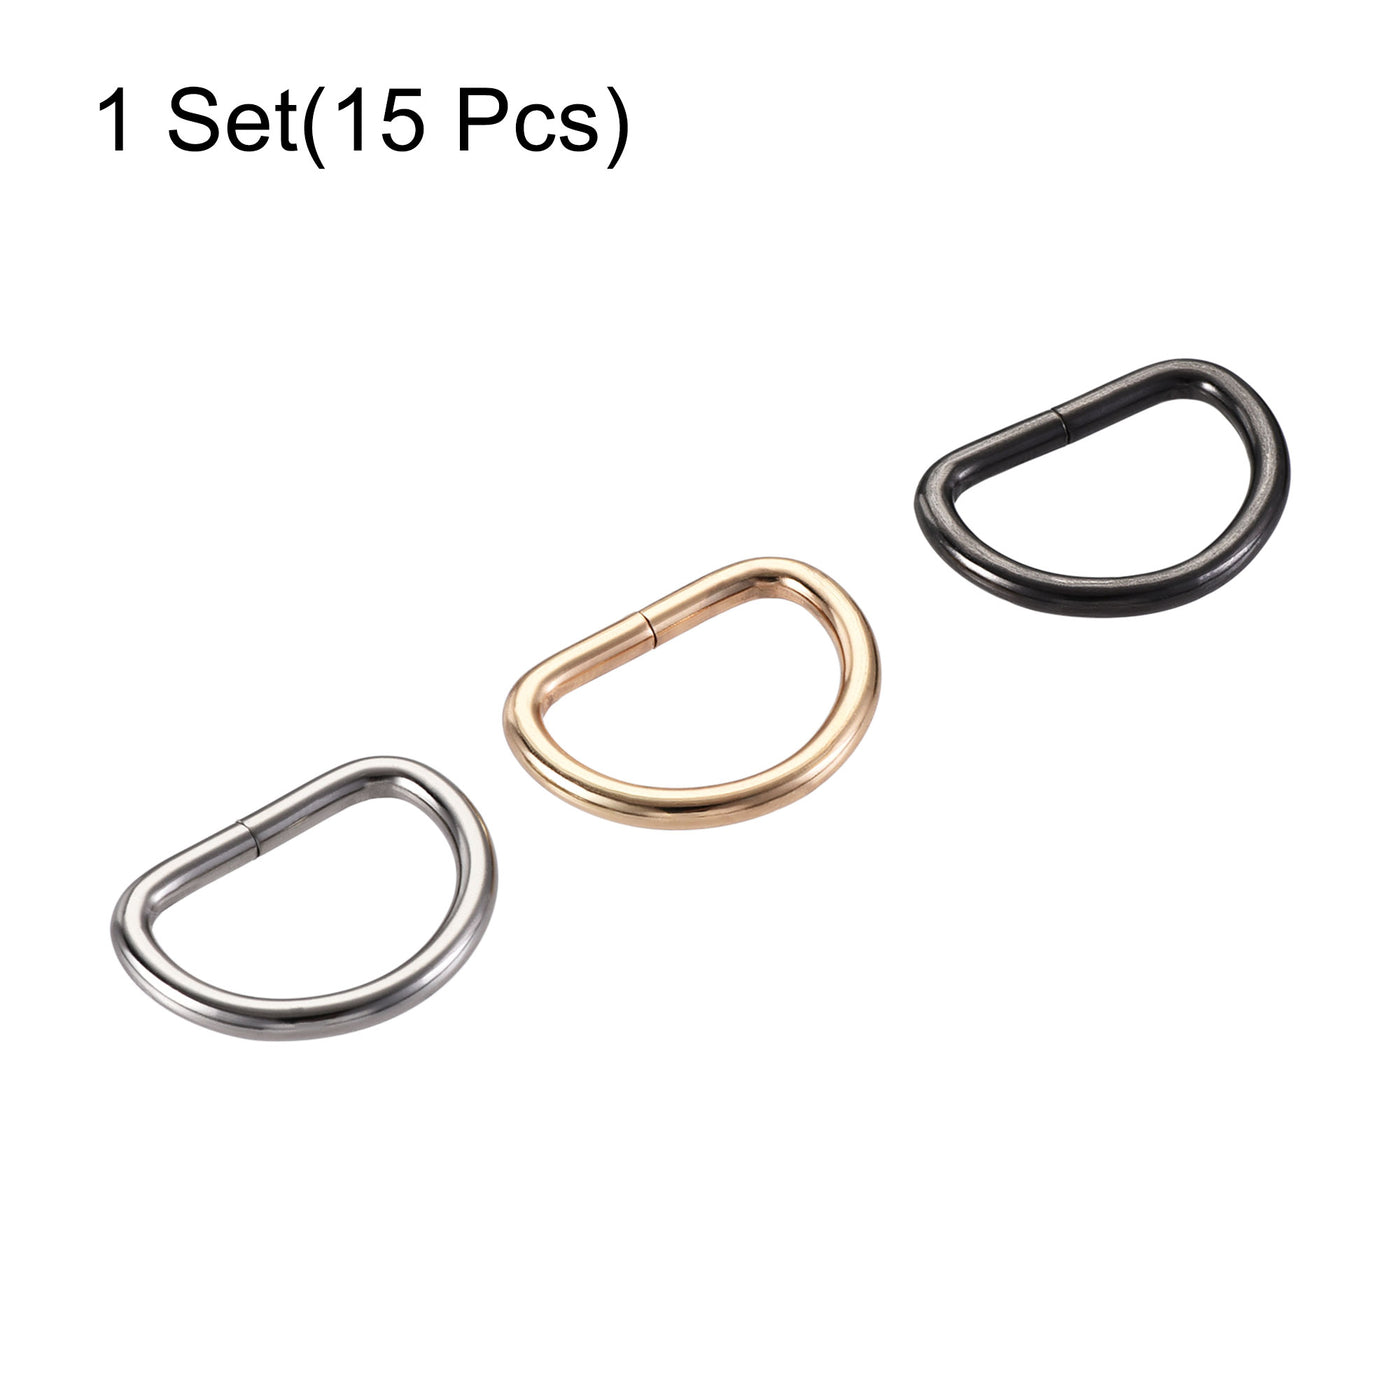 uxcell Uxcell Metal D Ring 0.98"(25mm) D-Rings Buckle Silver Tone, Gold Tone, Black(Total 15pcs)